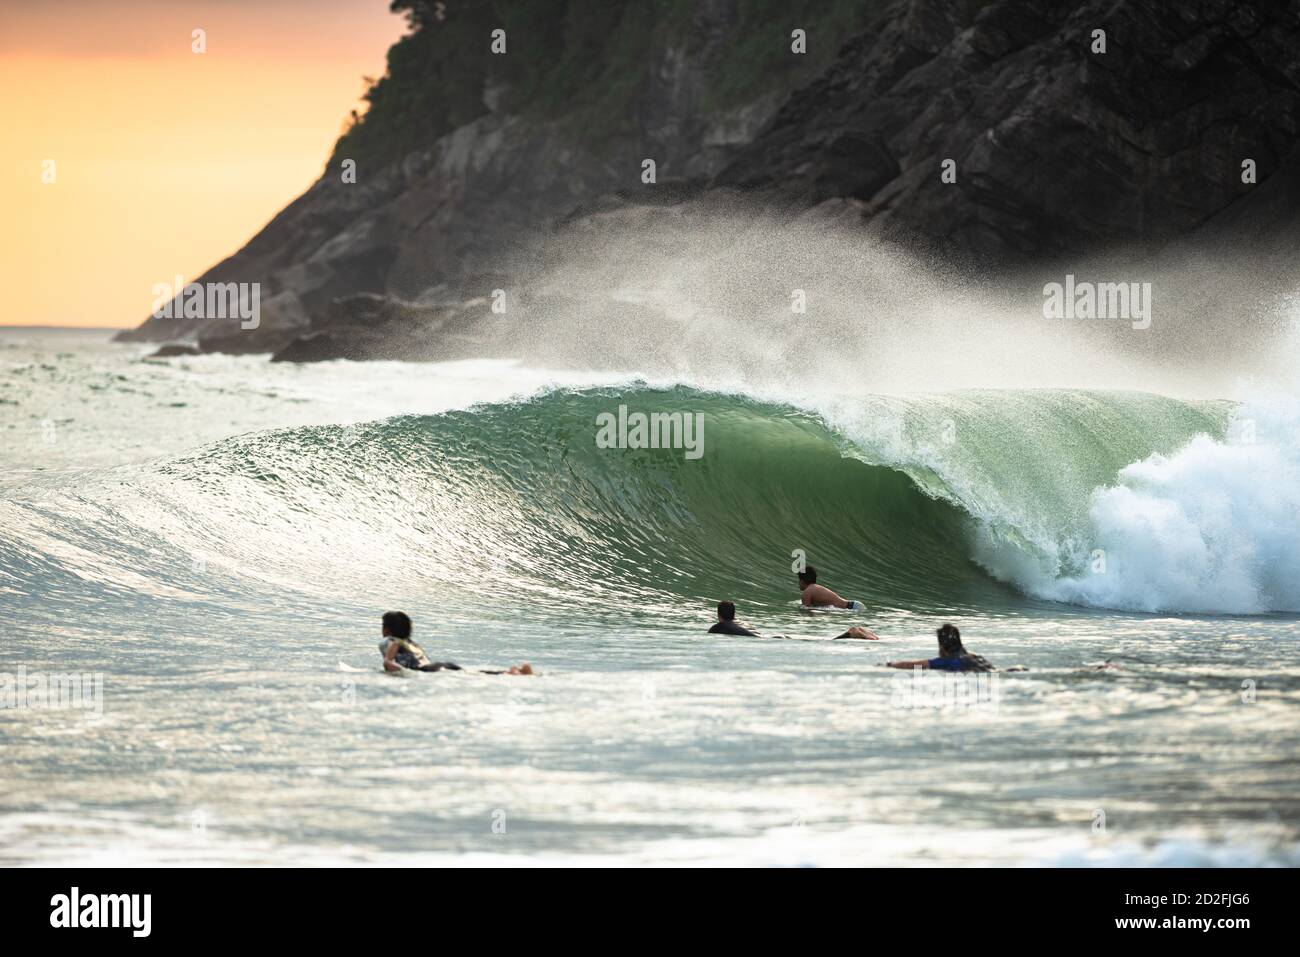 A wave breaks as surfers paddle out, at Santiago Beach, SE Brazil Stock Photo